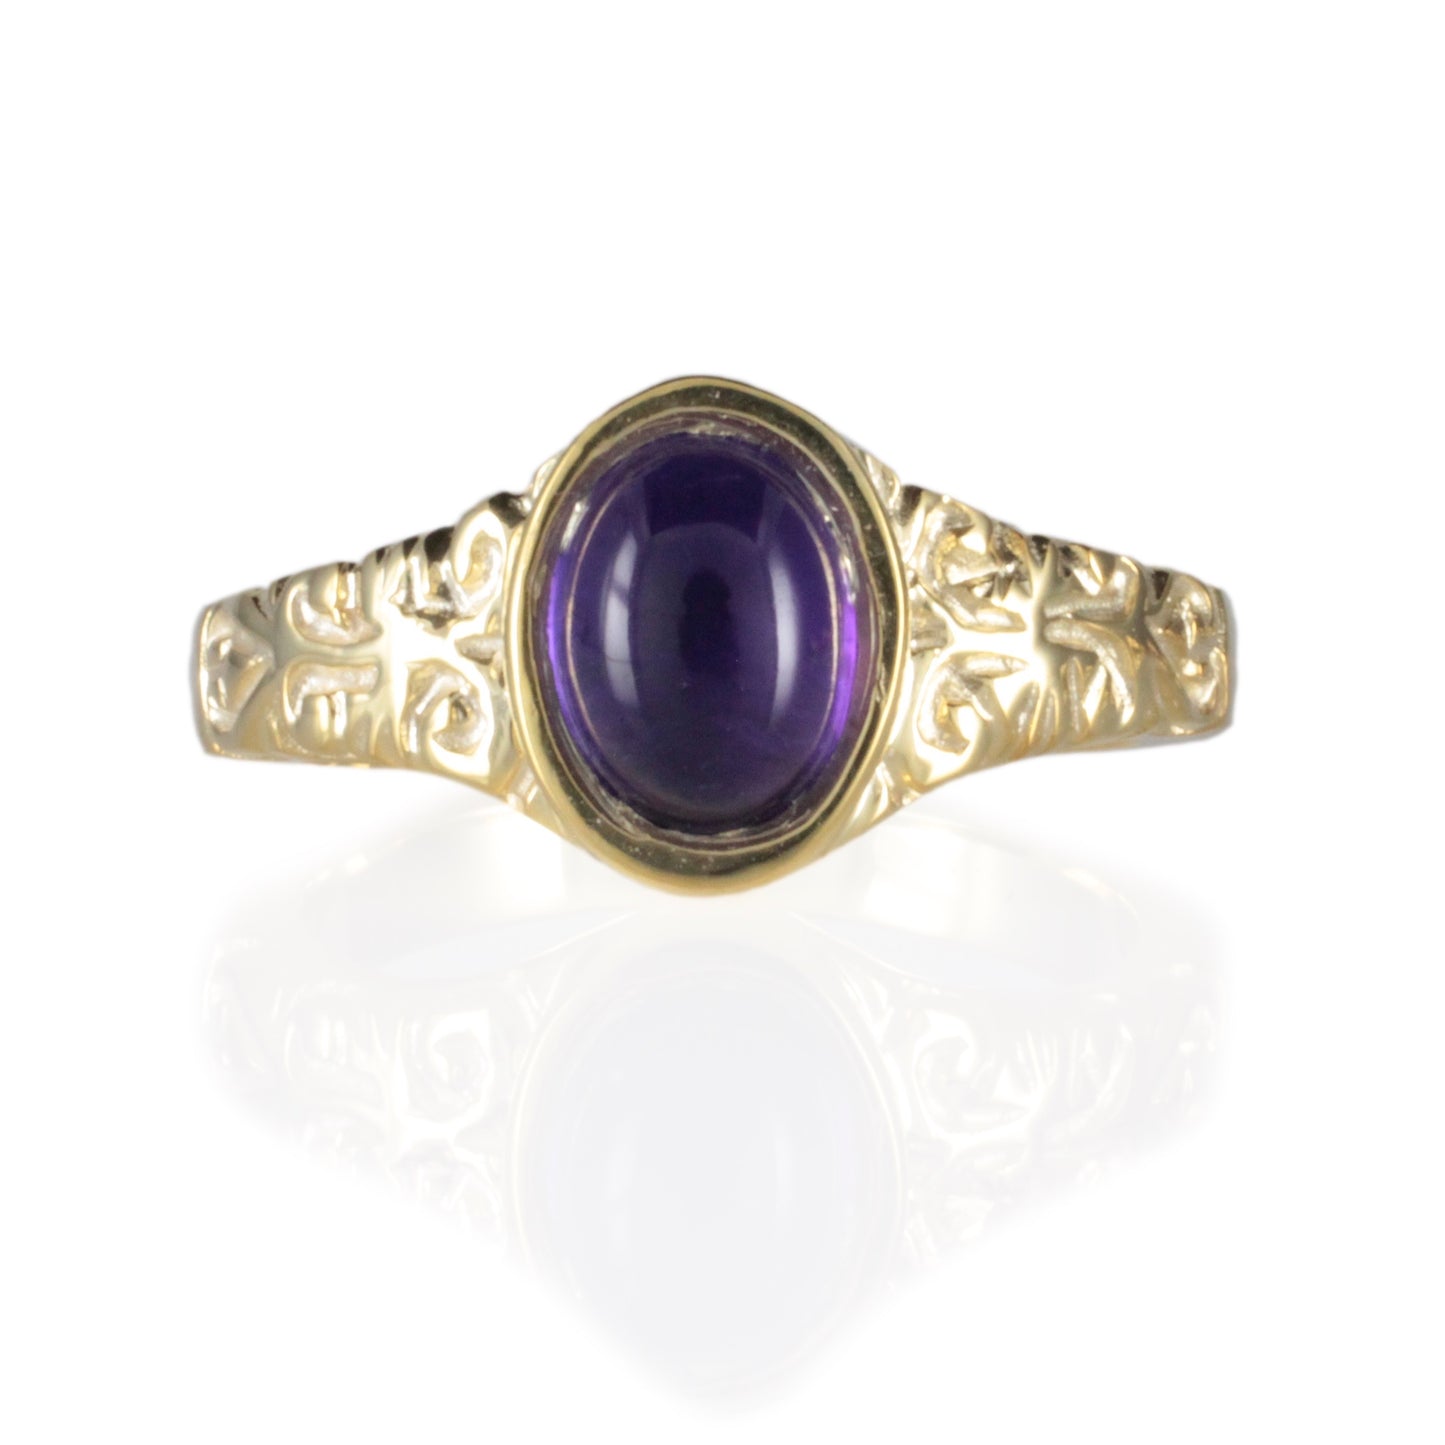 'Sostra' Victorian style Oval Amethyst Cabochon Gold Ring